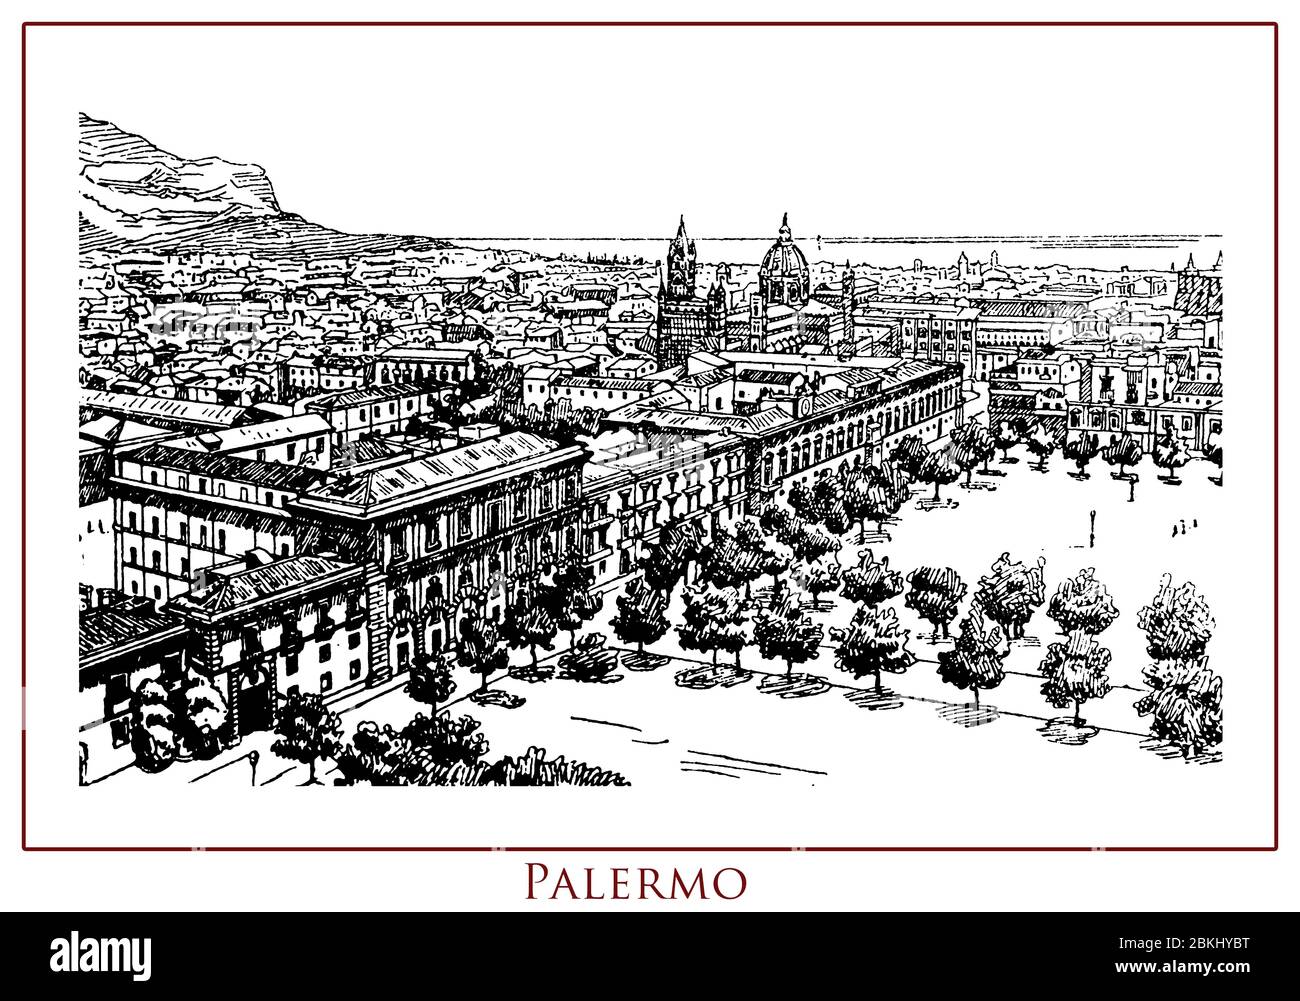 Vintage illustrated table with a panoramic view of the city of Palermo, 2700 year old, capital of Sicily island and region of Southern Italy, city rich of history, art,and culture. Stock Photo